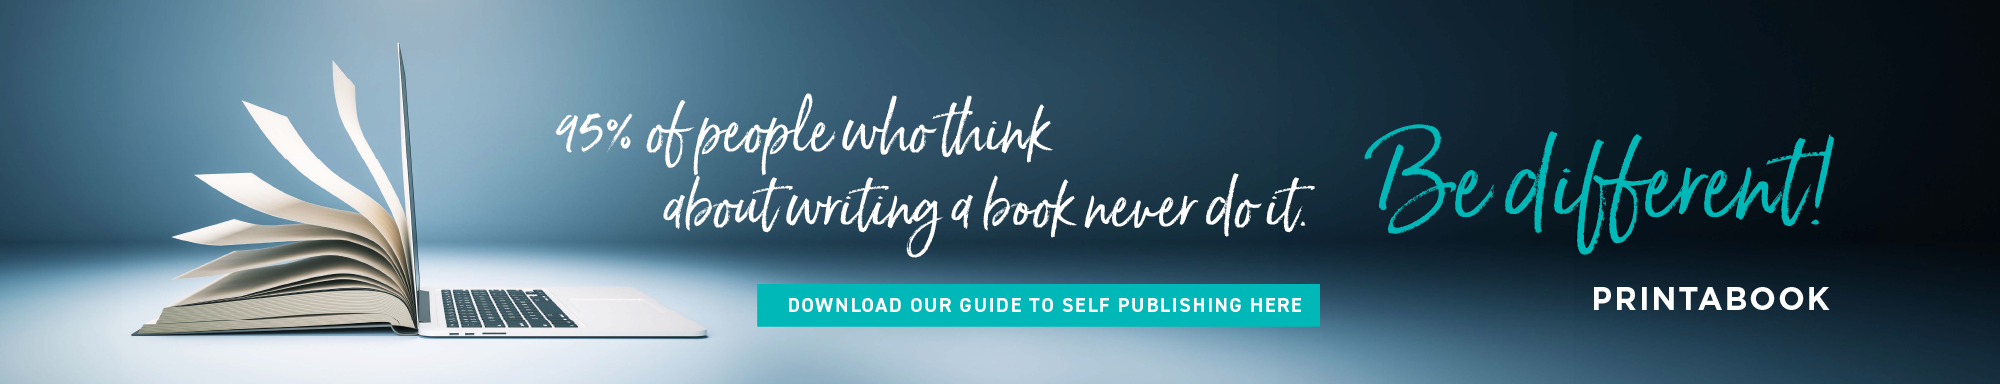 Guide to Self Publishing